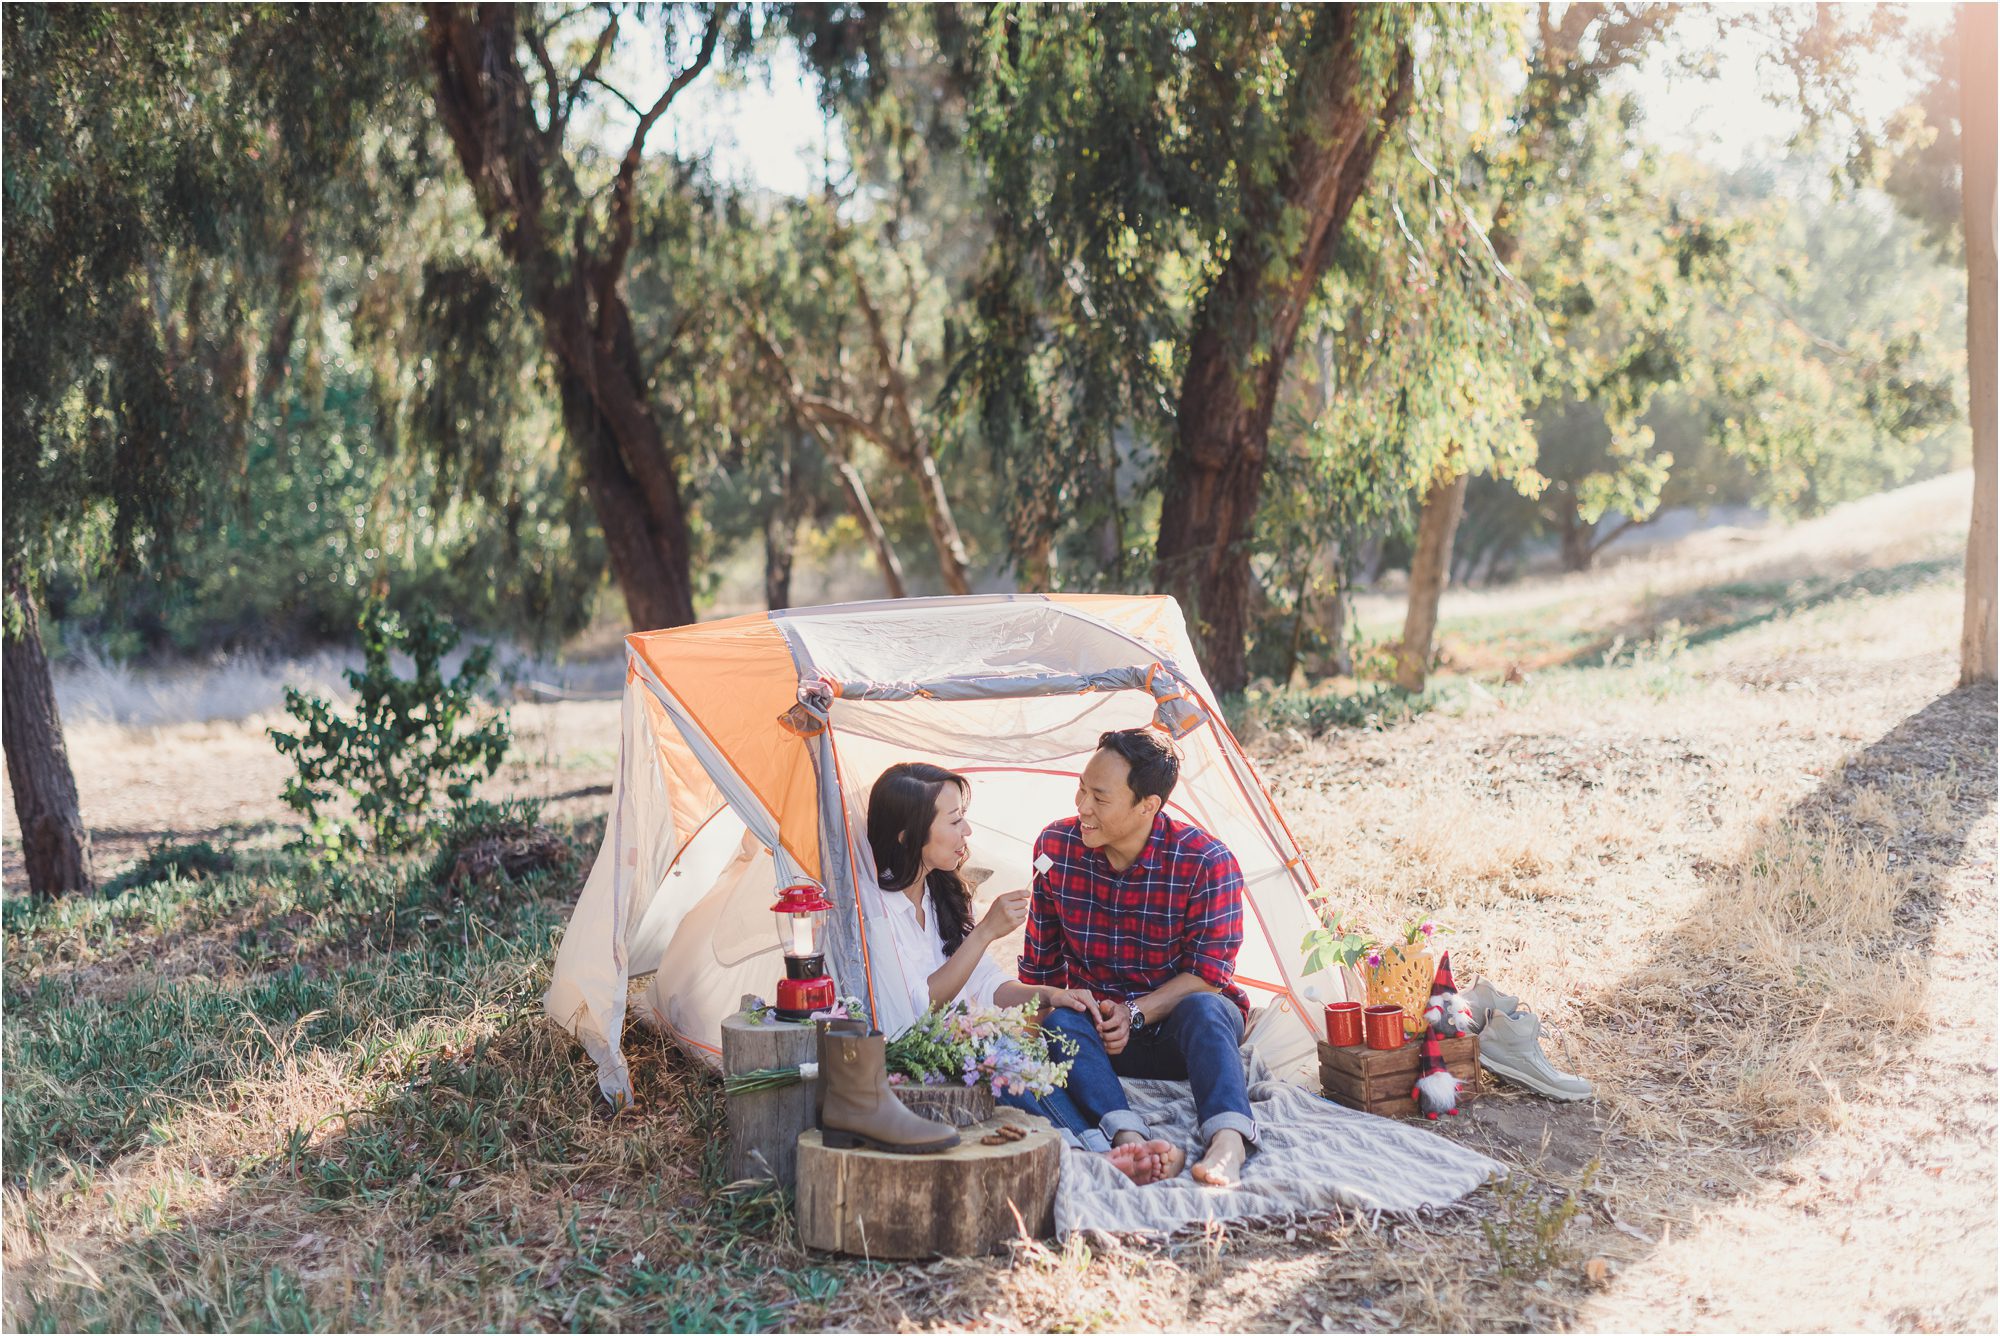 Camping Inspired Engagement 0008